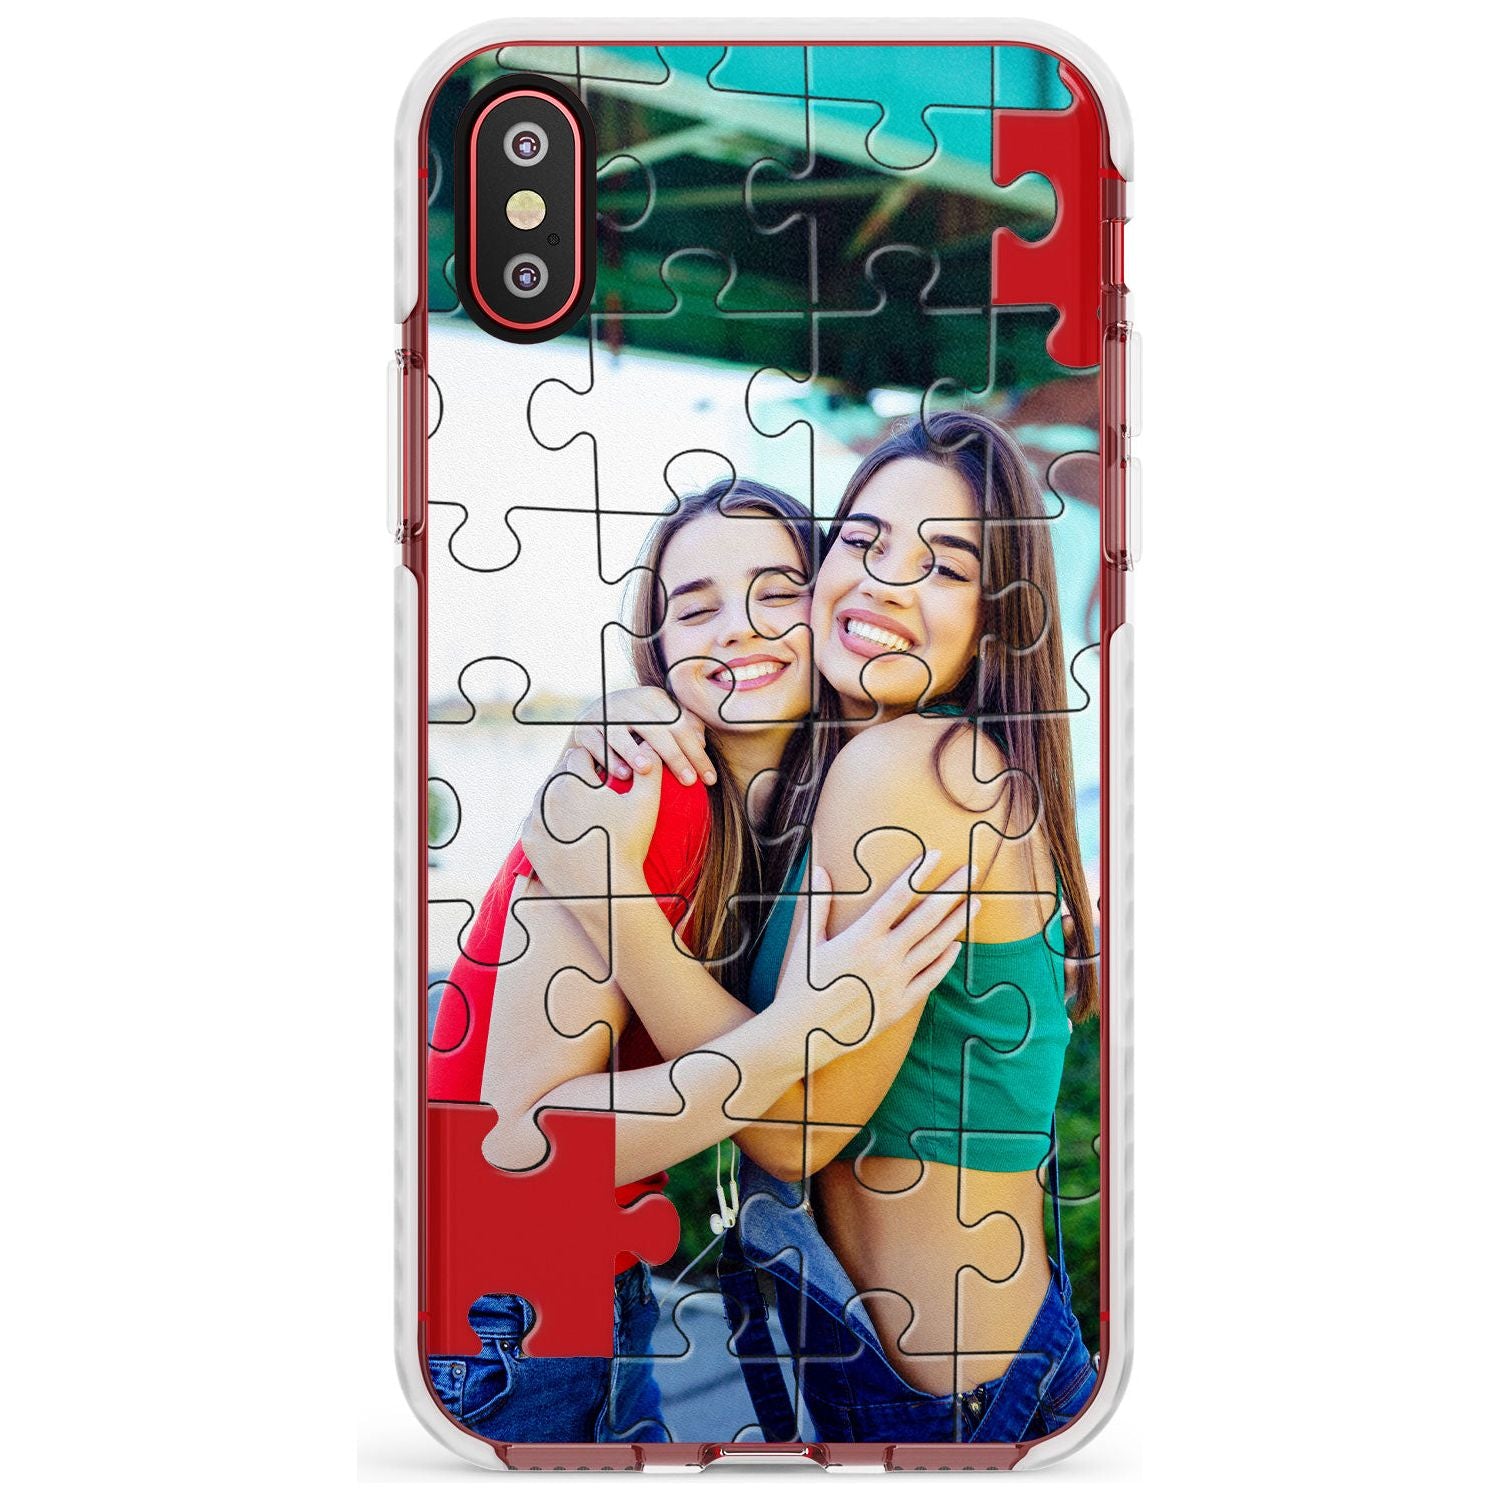 Personalised Jigsaw Puzzle Photo Impact Phone Case for iPhone X XS Max XR